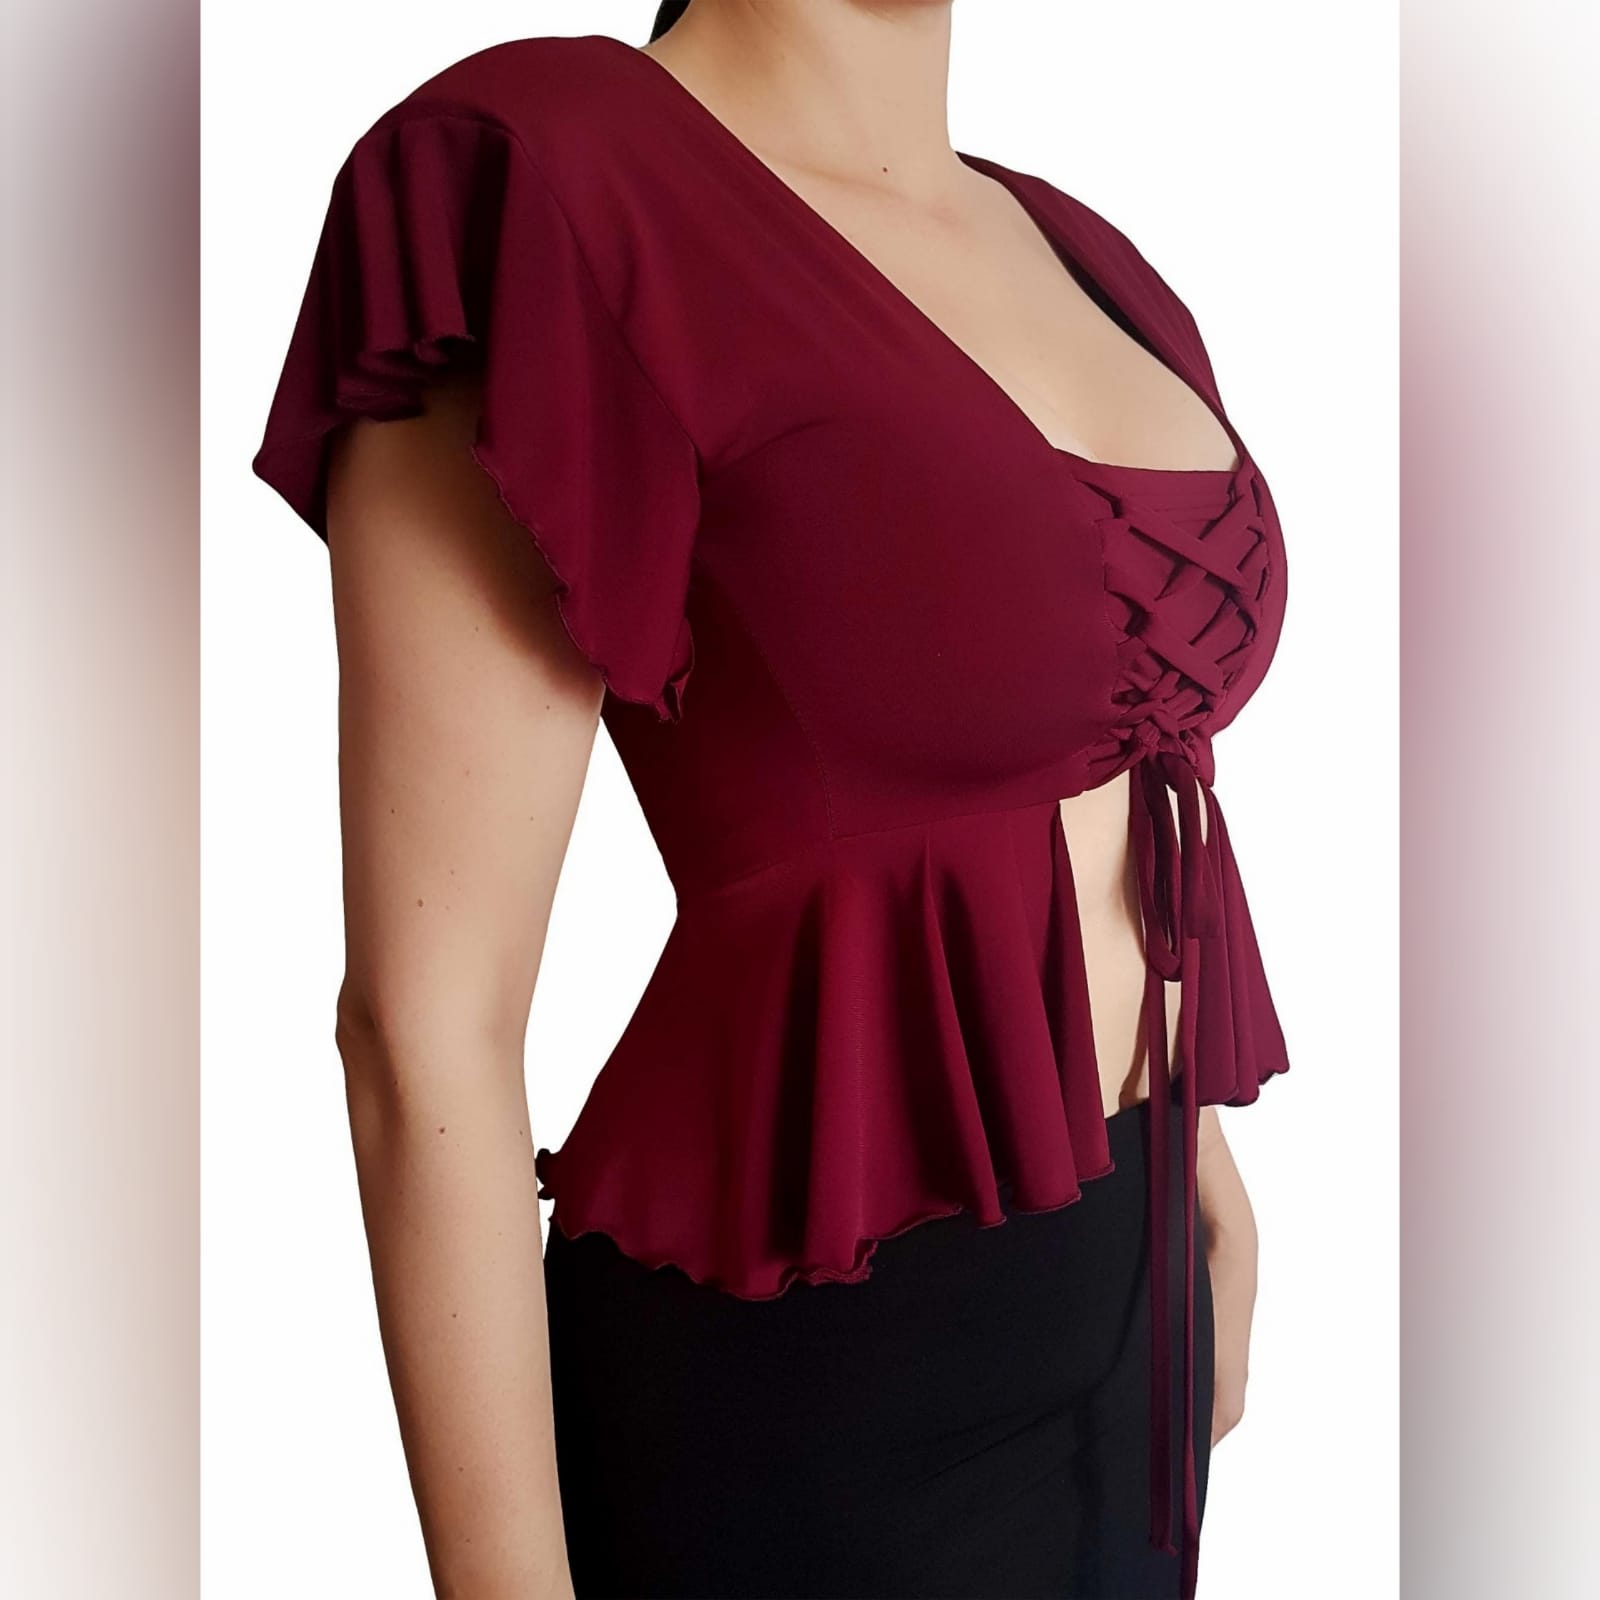 Maroon sexy casual top high waist peplum 1 maroon sexy casual top, with a high waist peplum. Lace-up detail in the front to adjust fit. This elegant top has dramatic shoulders which adds a touch of couture to the look. Handmade top, unique look, and a special piece that you can add to your wardrobe. We offer this high shoulder top in several colours.